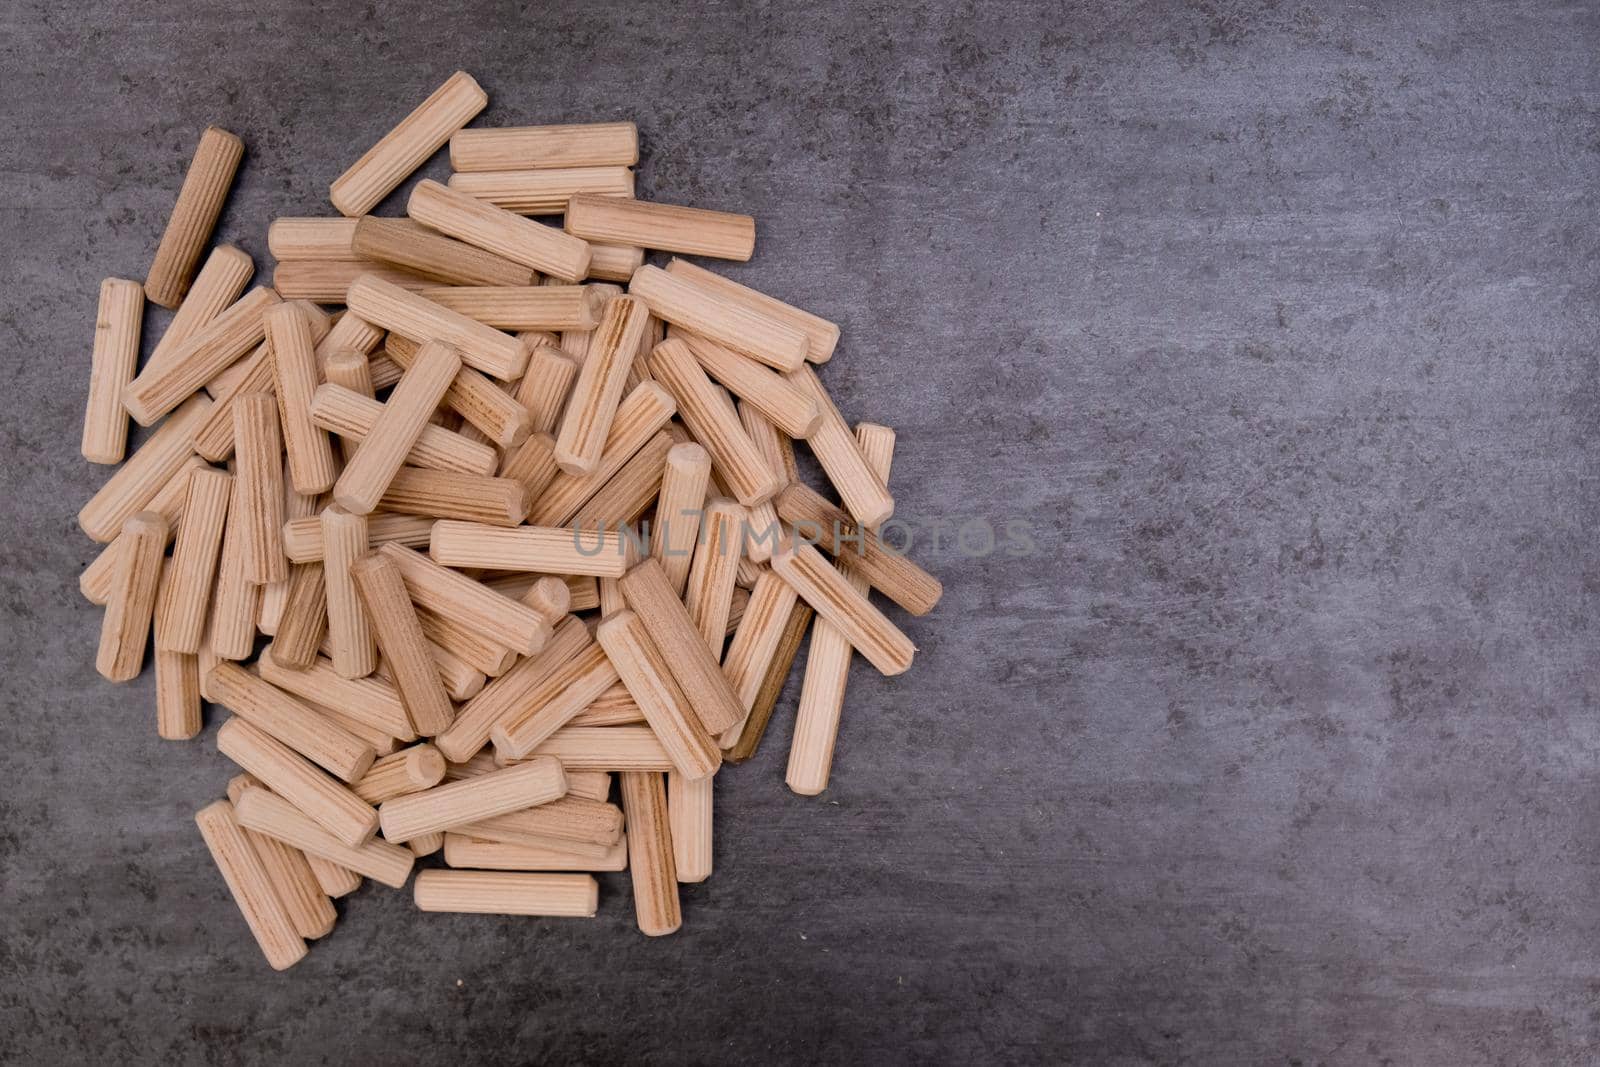 View of a grouping of wooden dowels on grey background. Close-up. Selective focus.